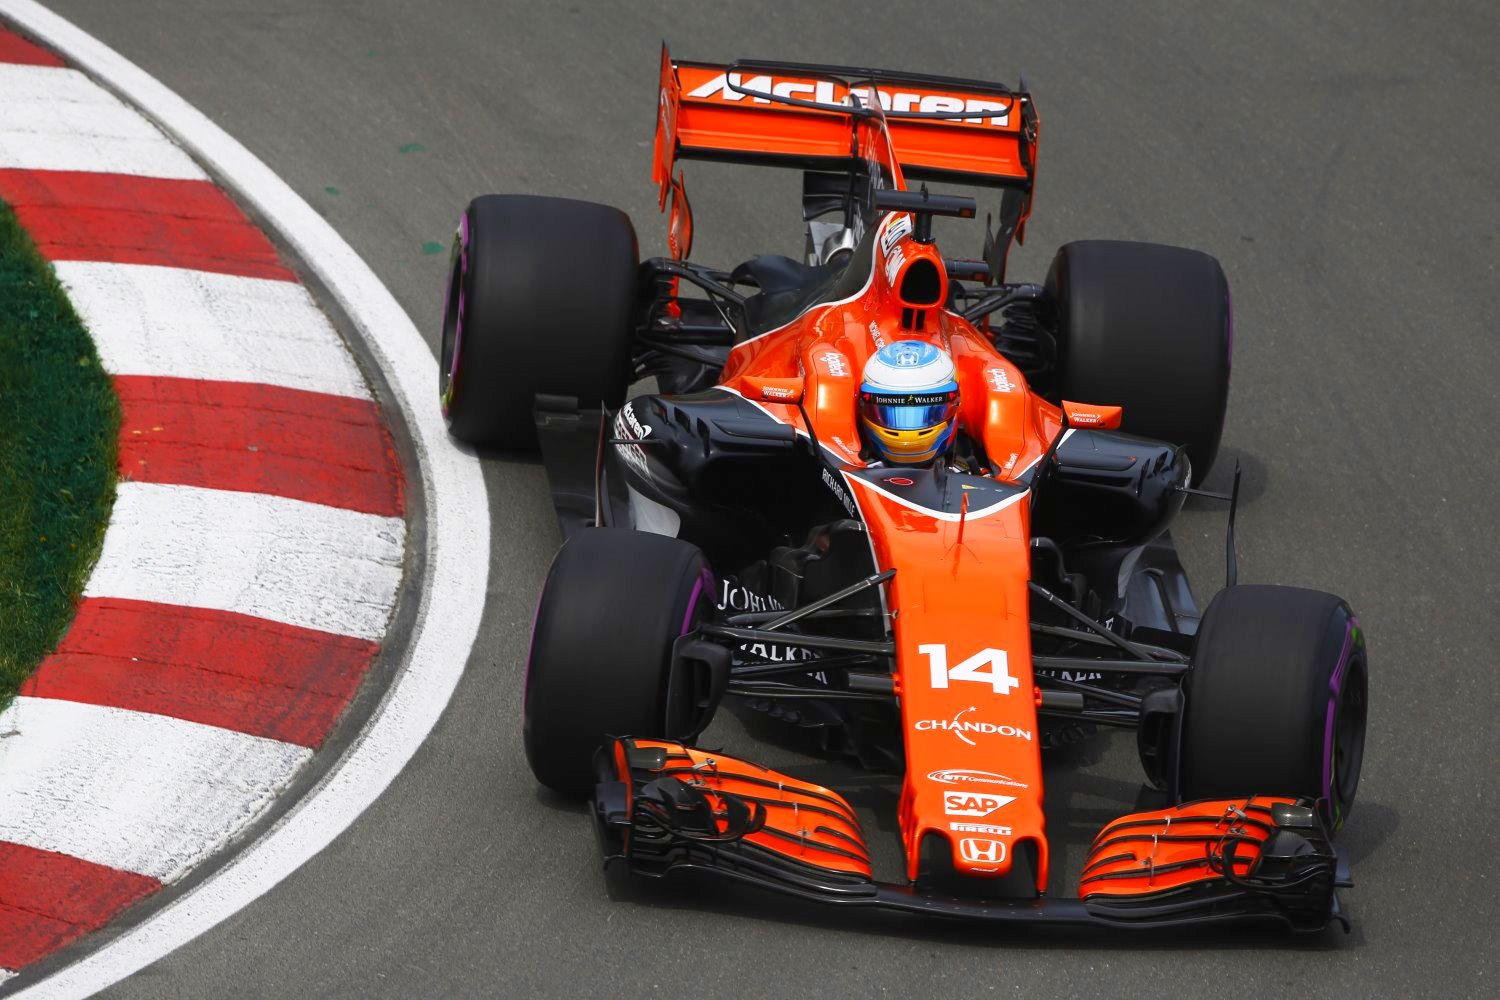 There seems little doubt now that McLaren will switch to Mercedes power units